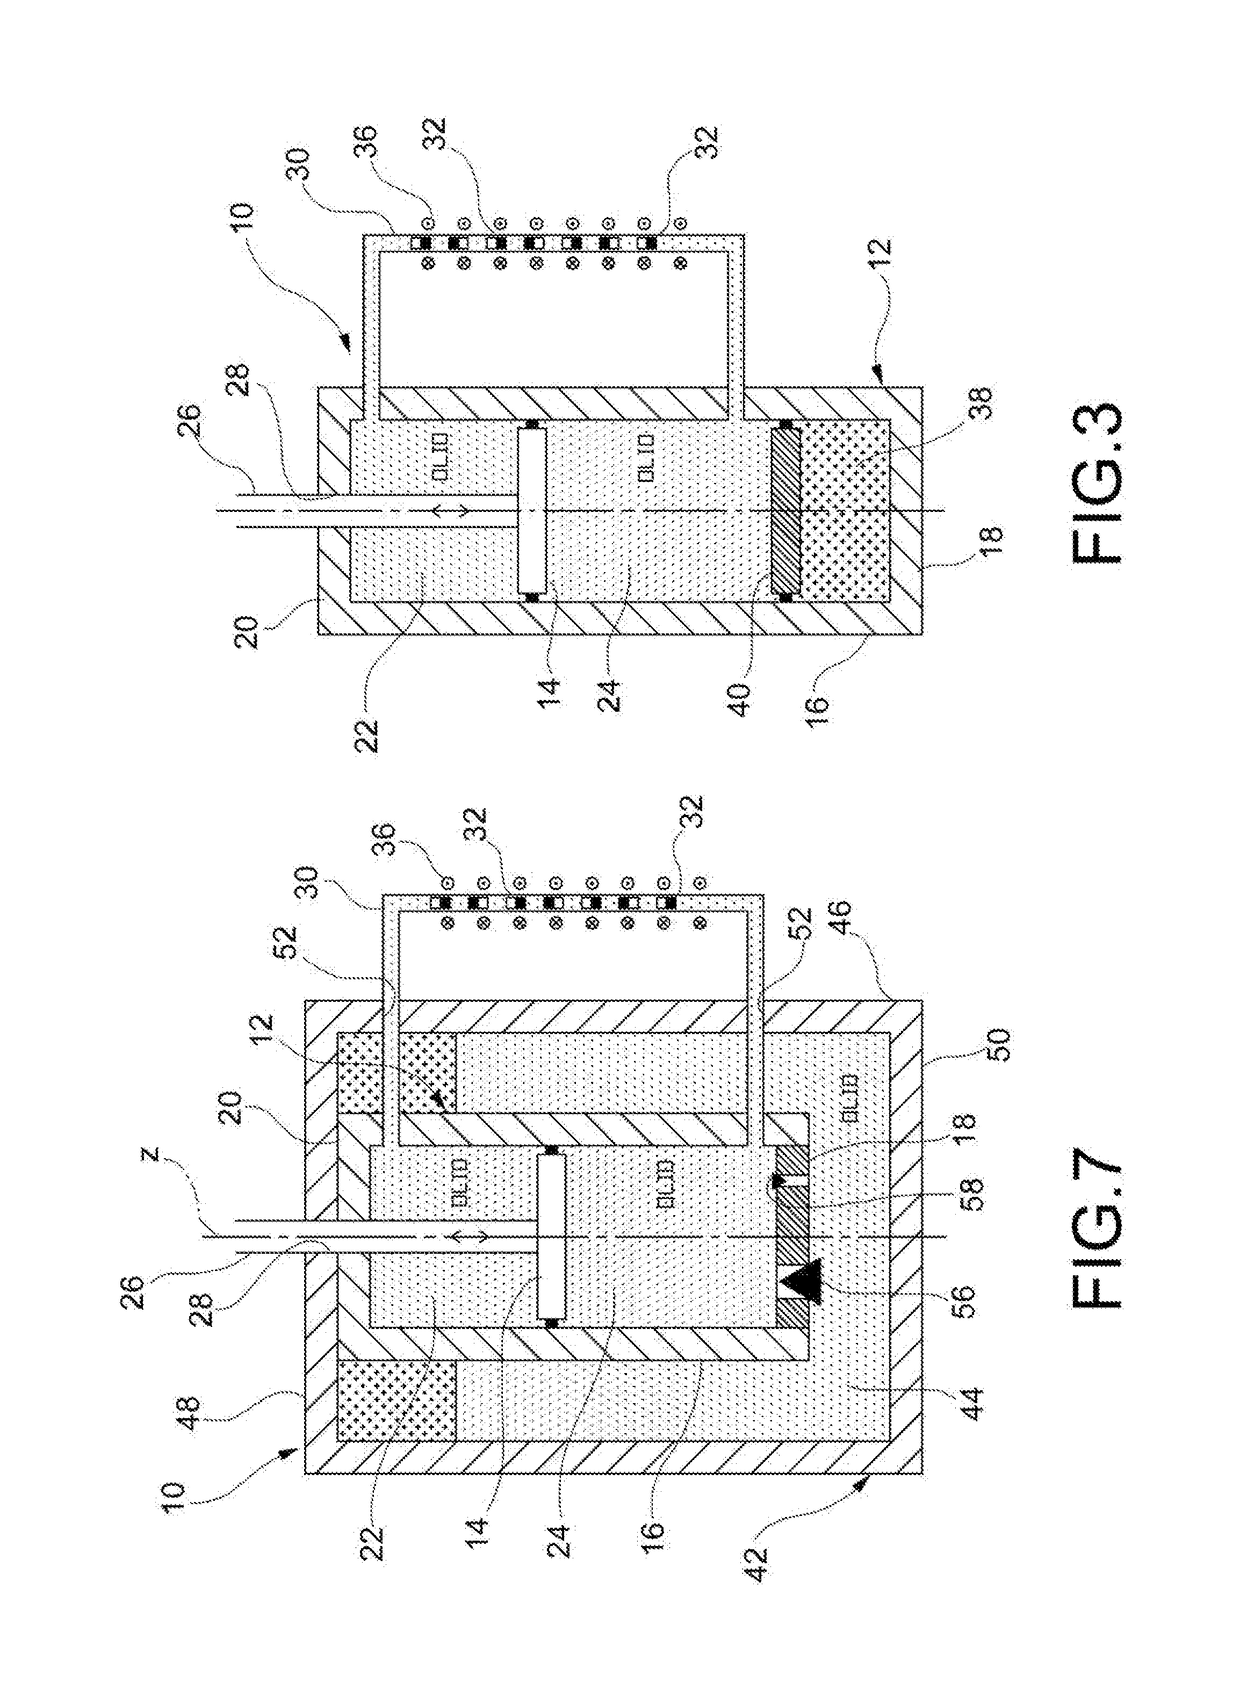 Regenerative hydraulic shock-absorber for vehicle suspension